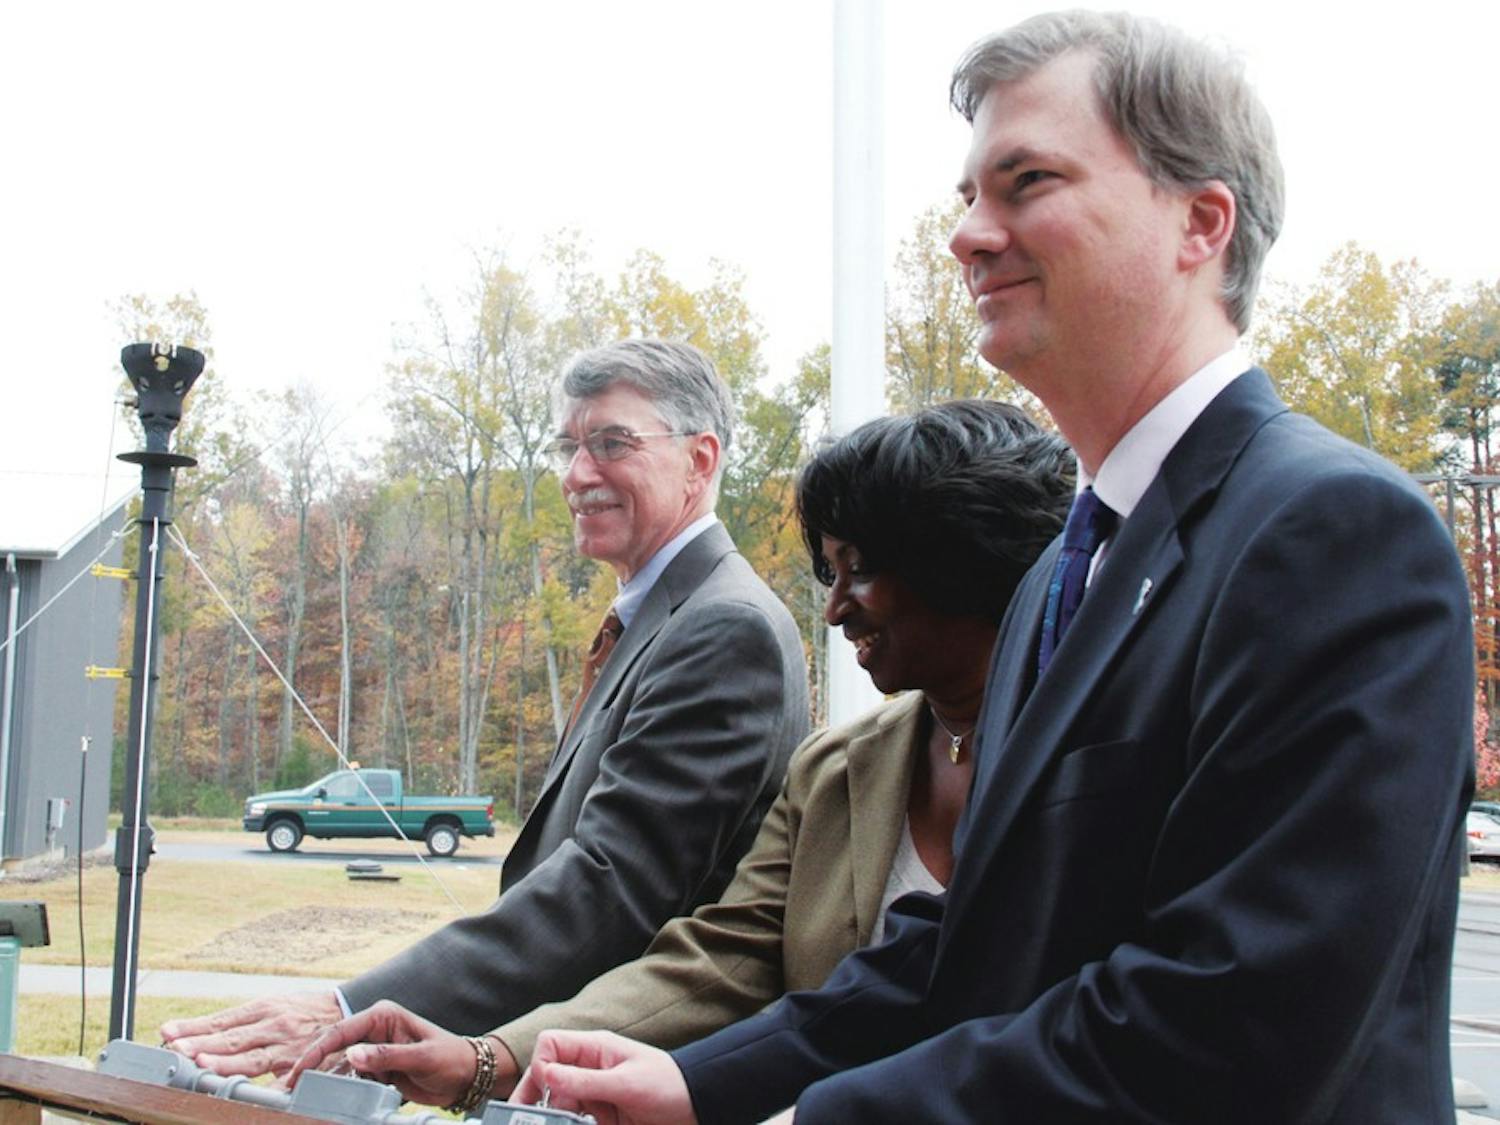 Rep. Joe Hackney, Valerie Foushee and Holden Thorp prepare to light a symbolic flare Monday marking the start of a joint project between UNC and Orange County to convert methane gas into electricity.